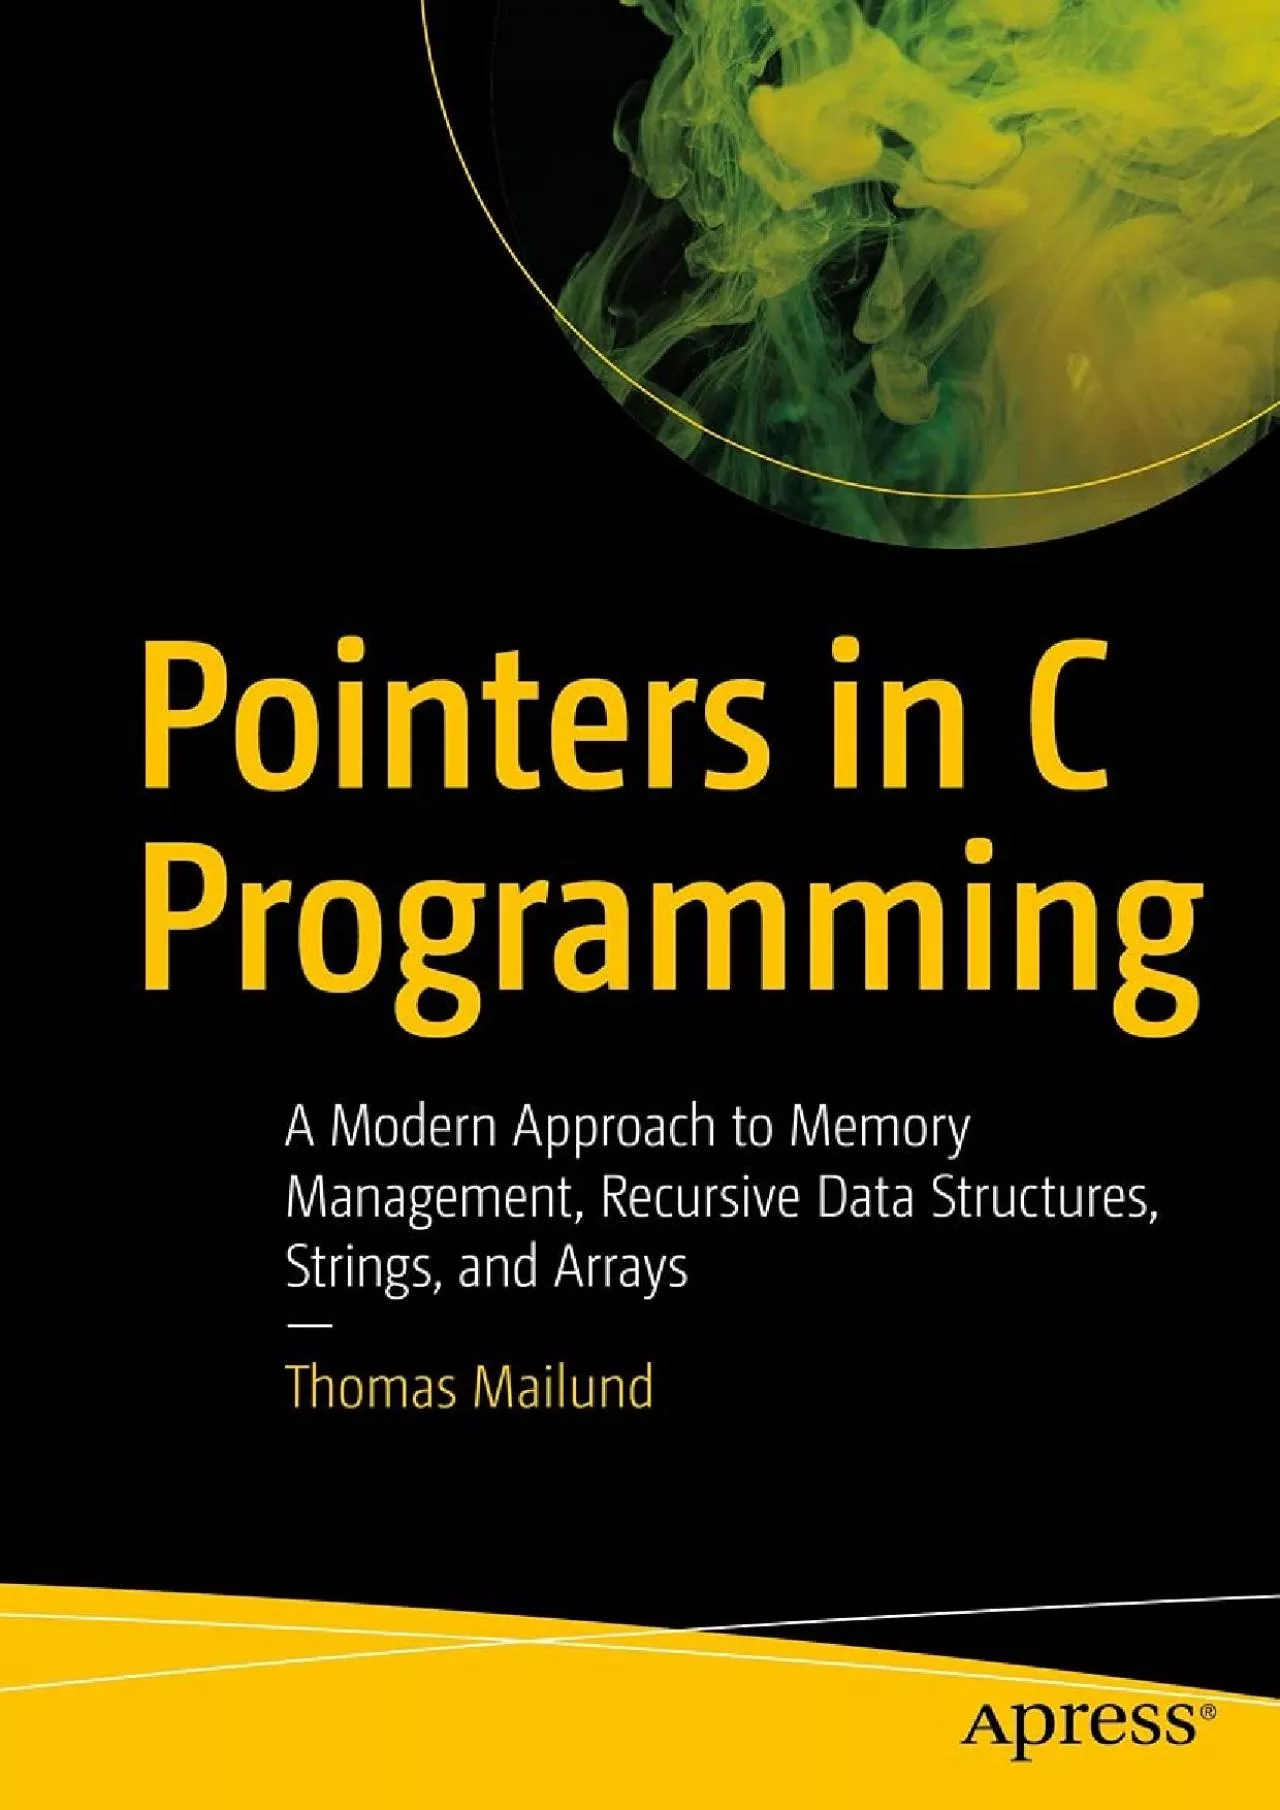 [FREE]-Pointers in C Programming: A Modern Approach to Memory Management, Recursive Data